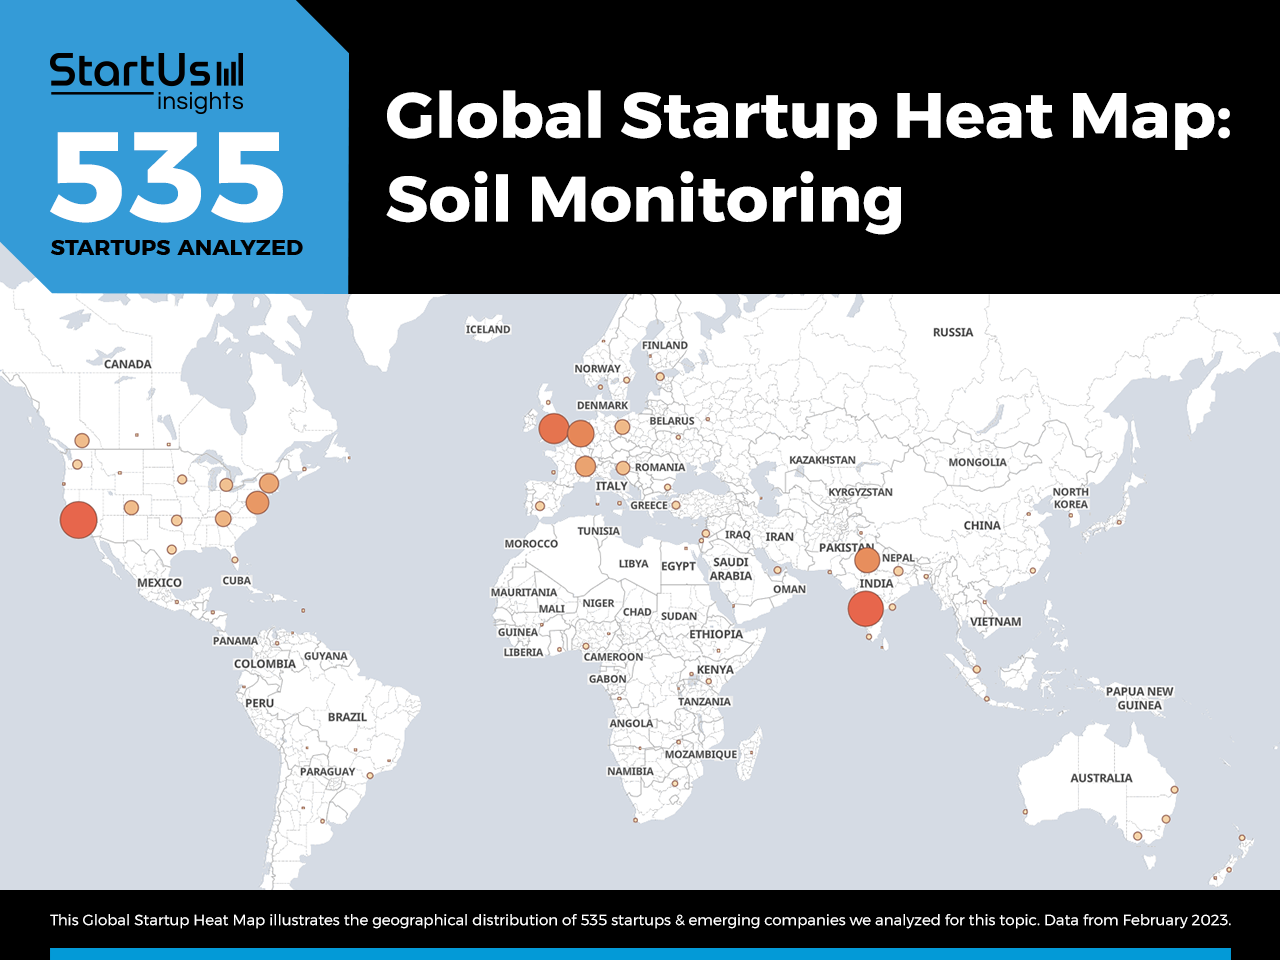 Soil-Monitoring-trends-Startups-TrendResearch-Heat-Map-StartUs-Insights-noresize